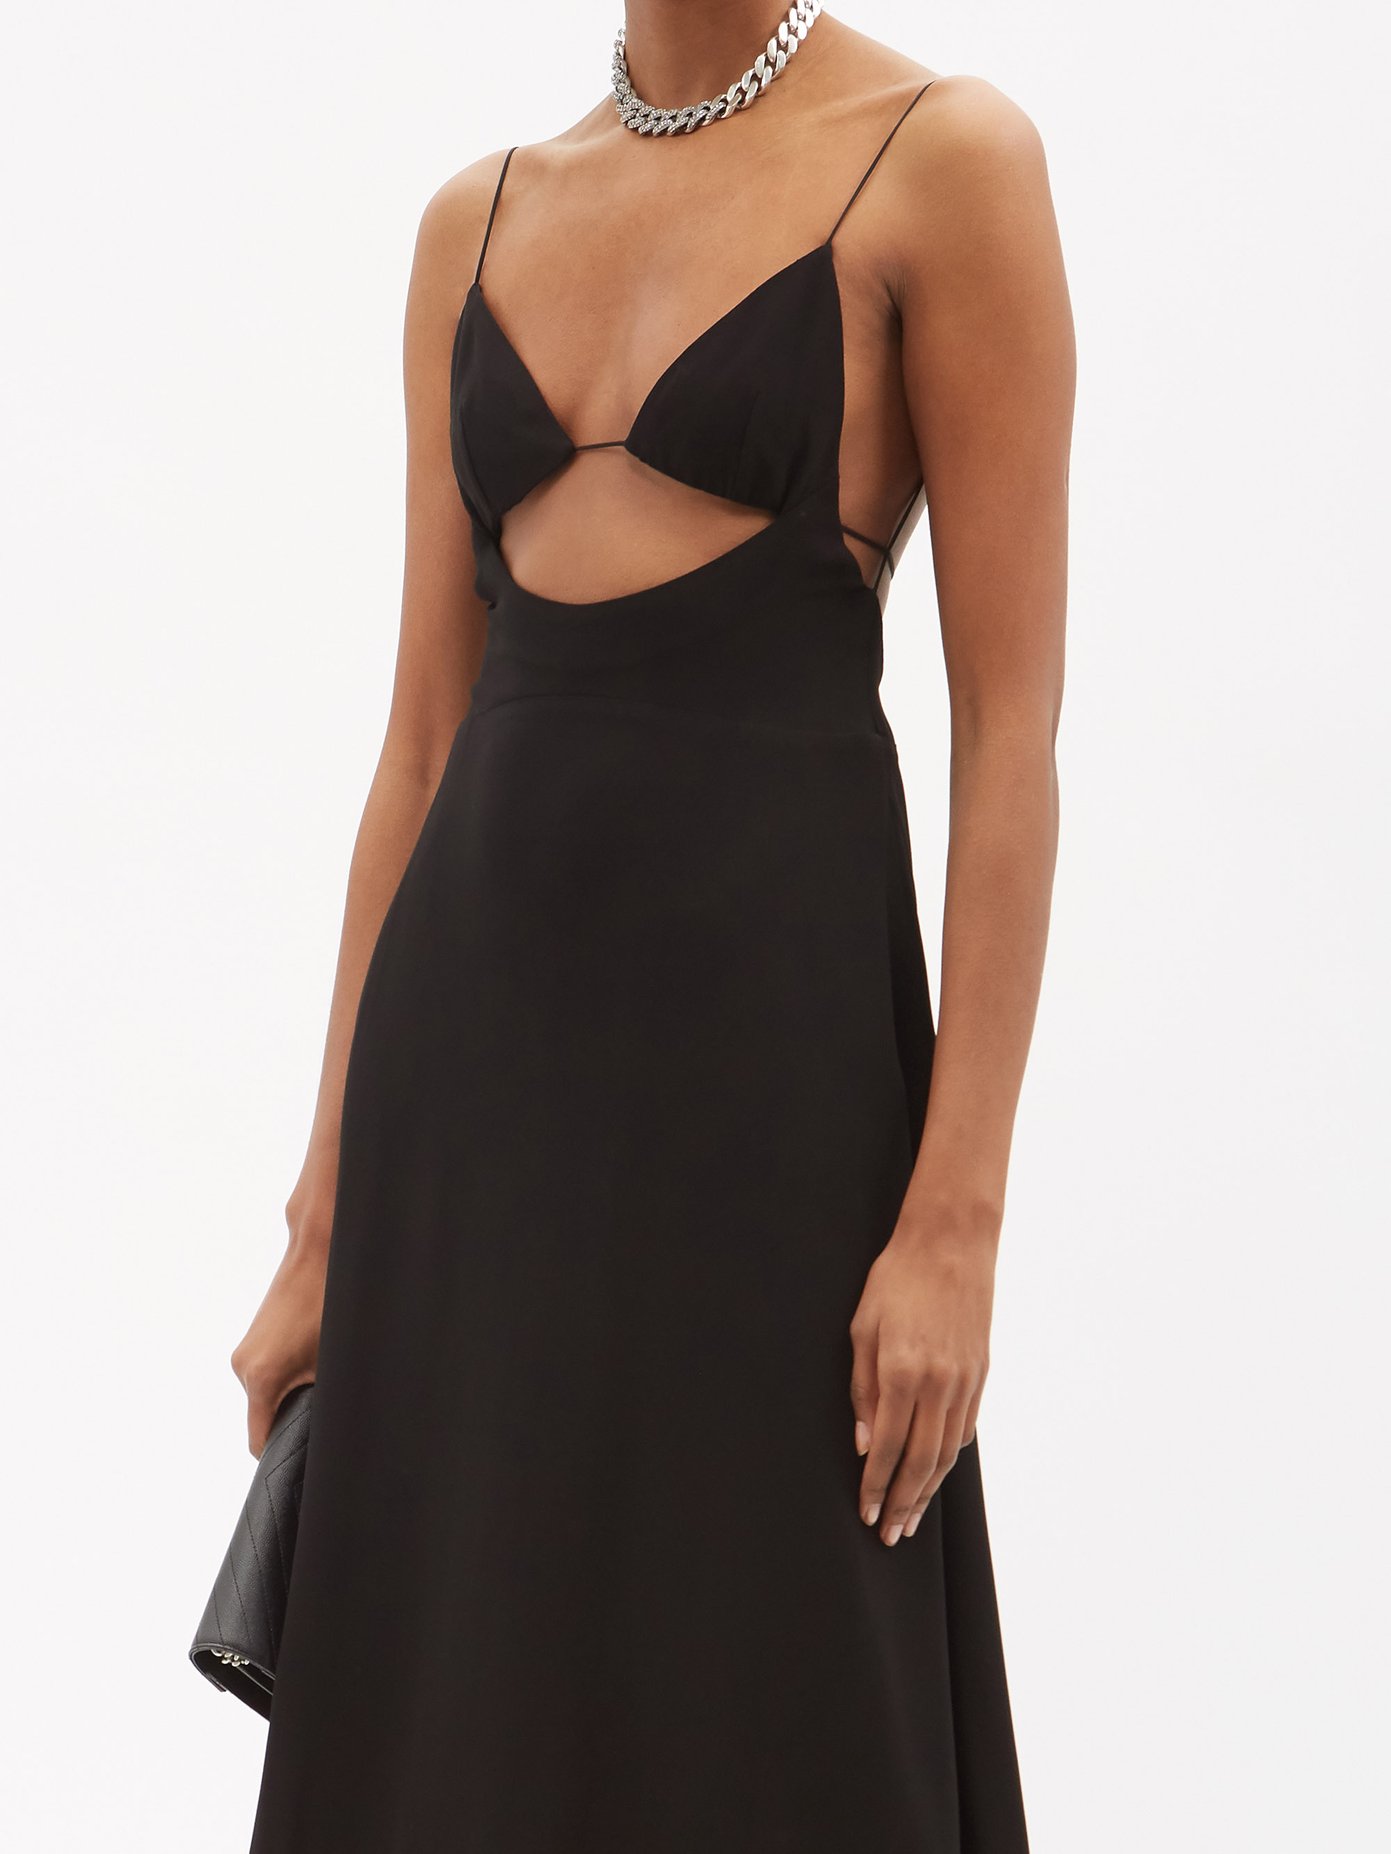 Anthony Vaccarello's seductive vision perfectly translates to Saint Laurent’s black crepe dress, defined by a front cutout and low back framed with spaghetti straps.